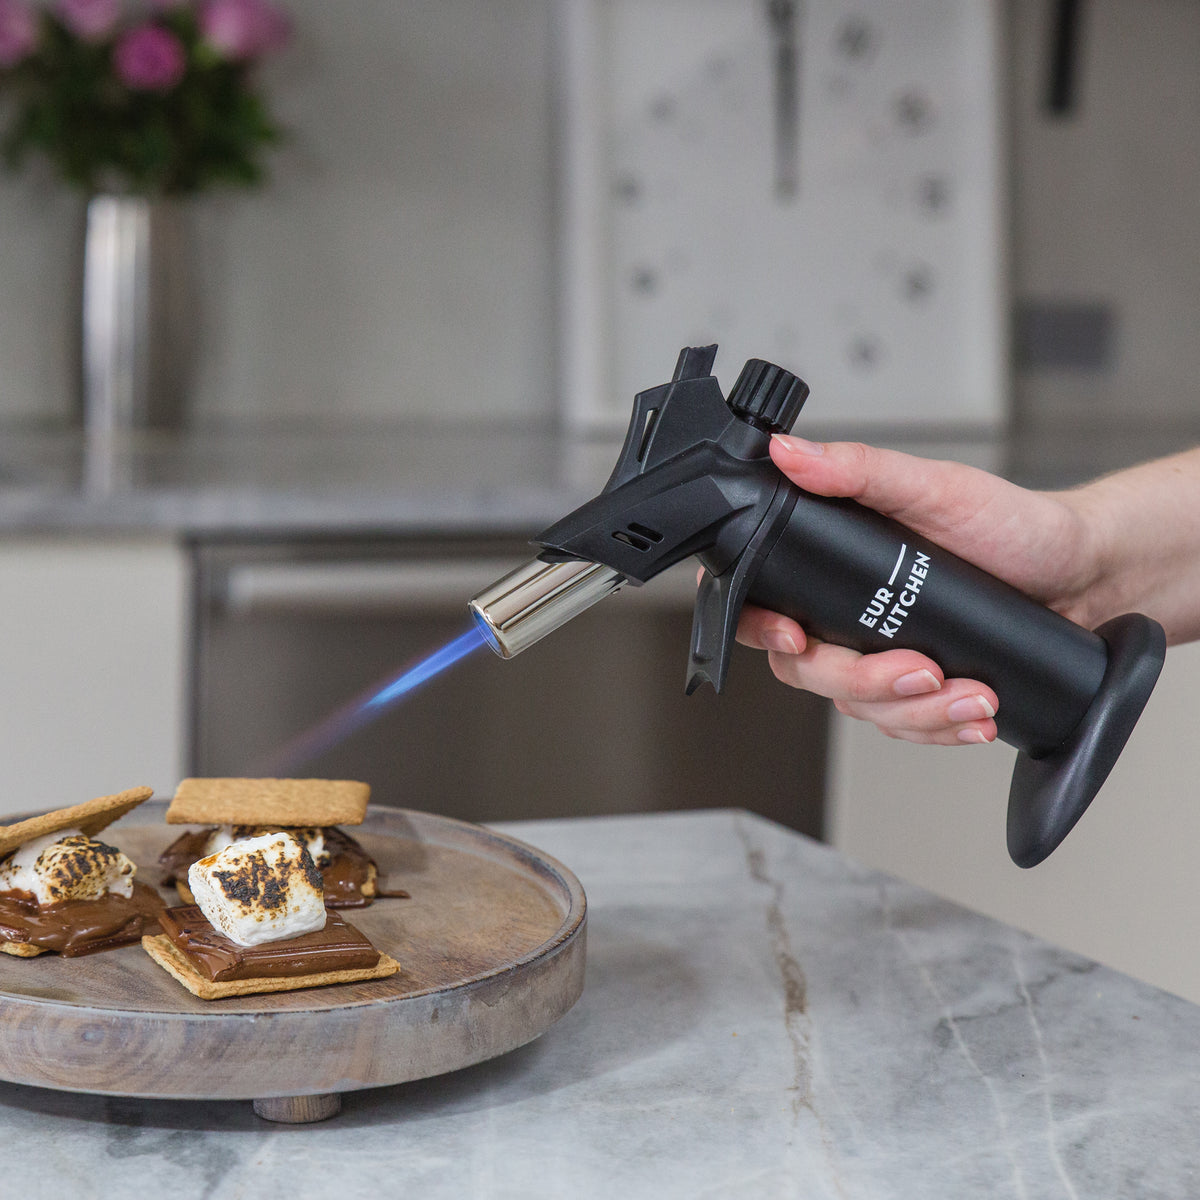 Culinary Torch Review: Enhance Your Cooking Experience